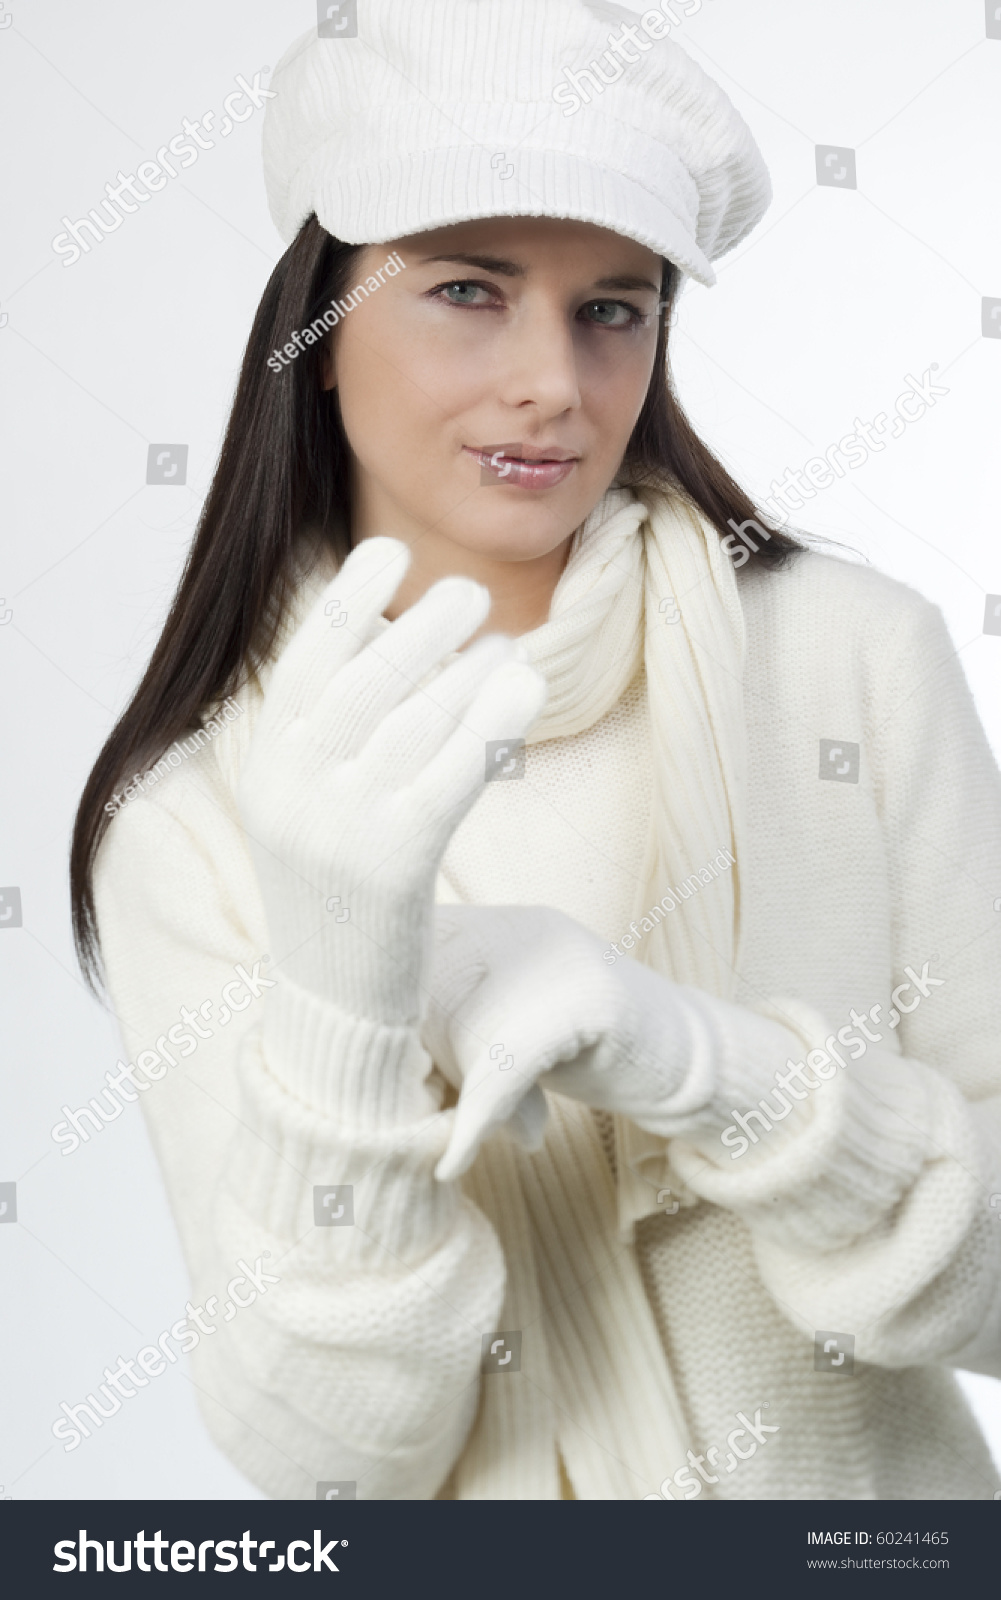 Young Woman Soft White Sweater Cap Stock Photo 60241465 - Shutterstock